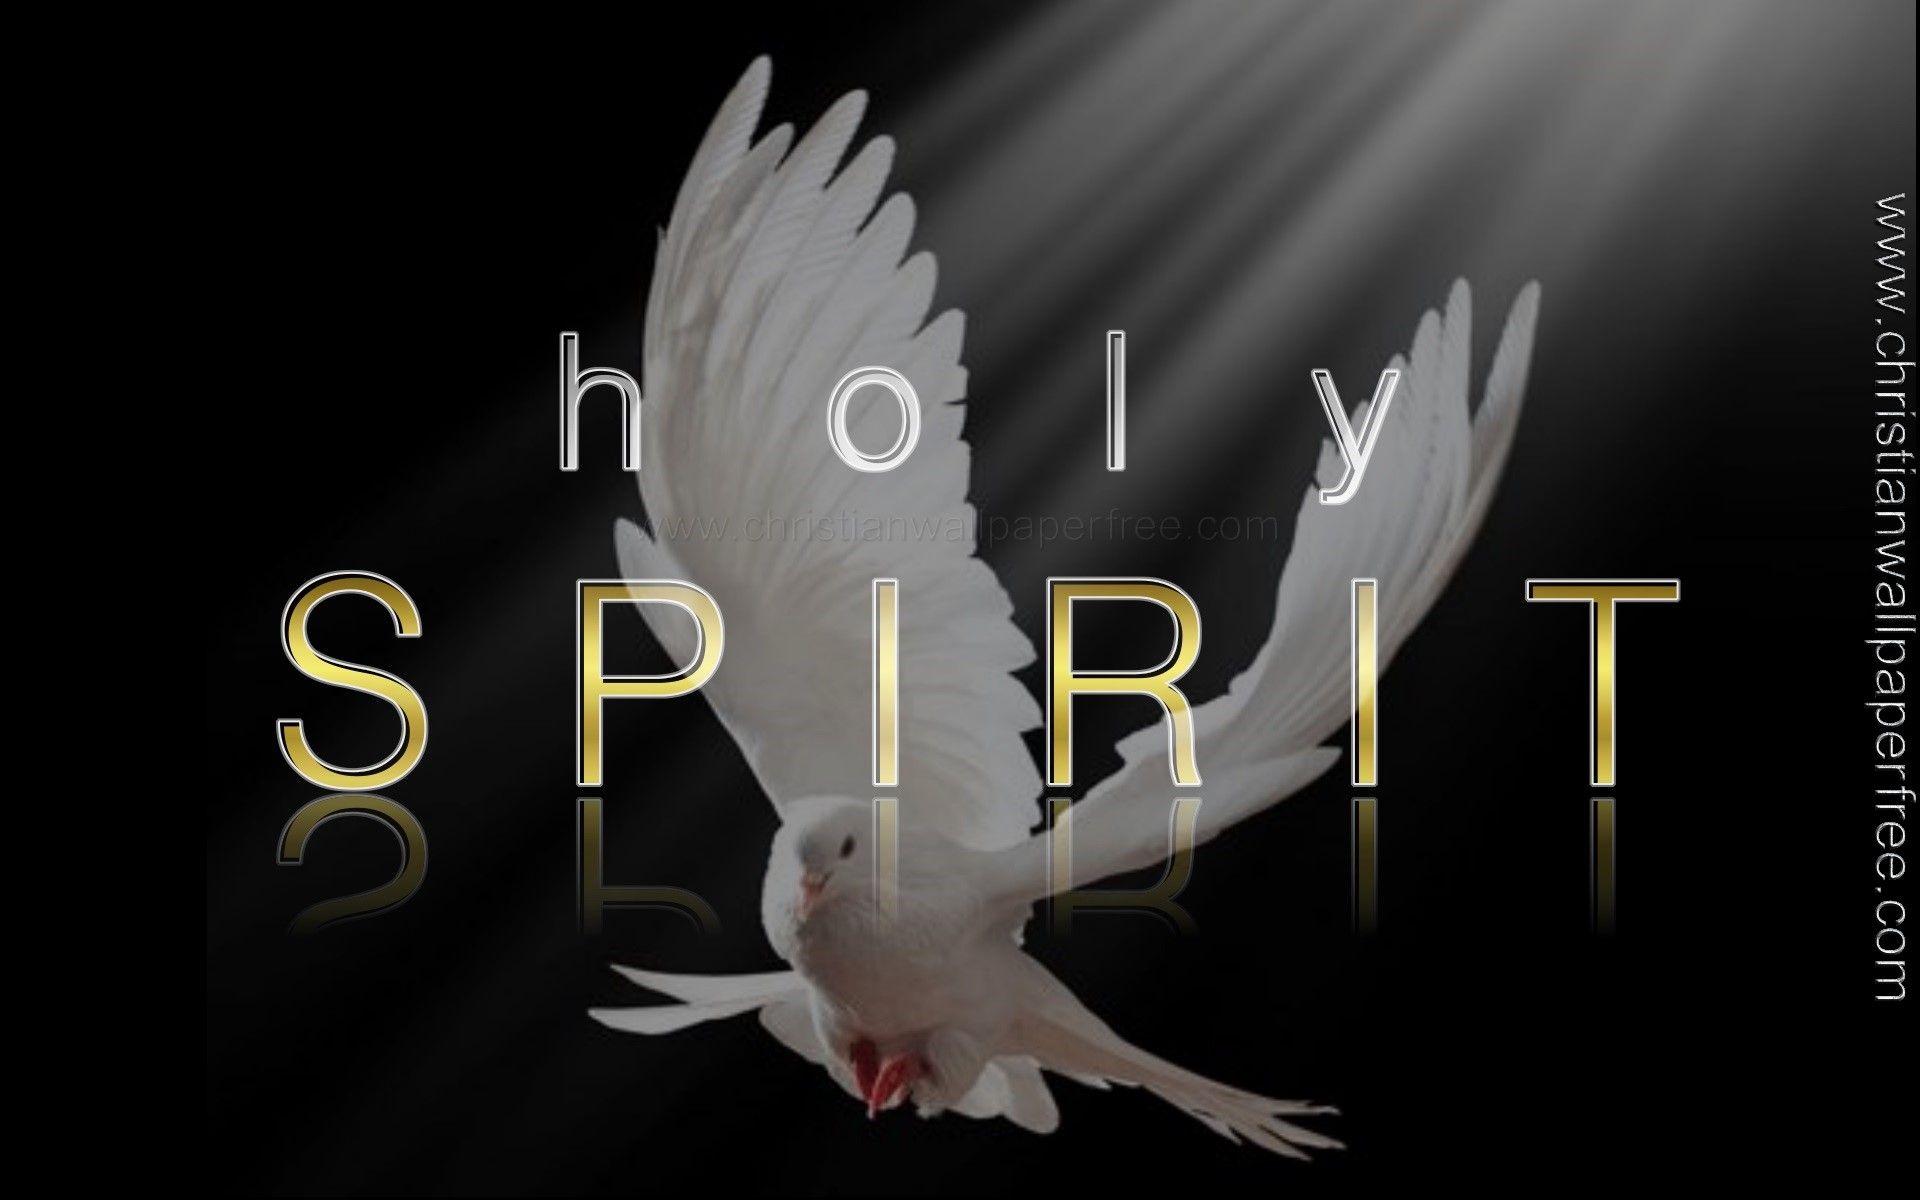 Holy Spirit Reflections Wallpaper Free. Holy spirit, Christian wallpaper, Christian background